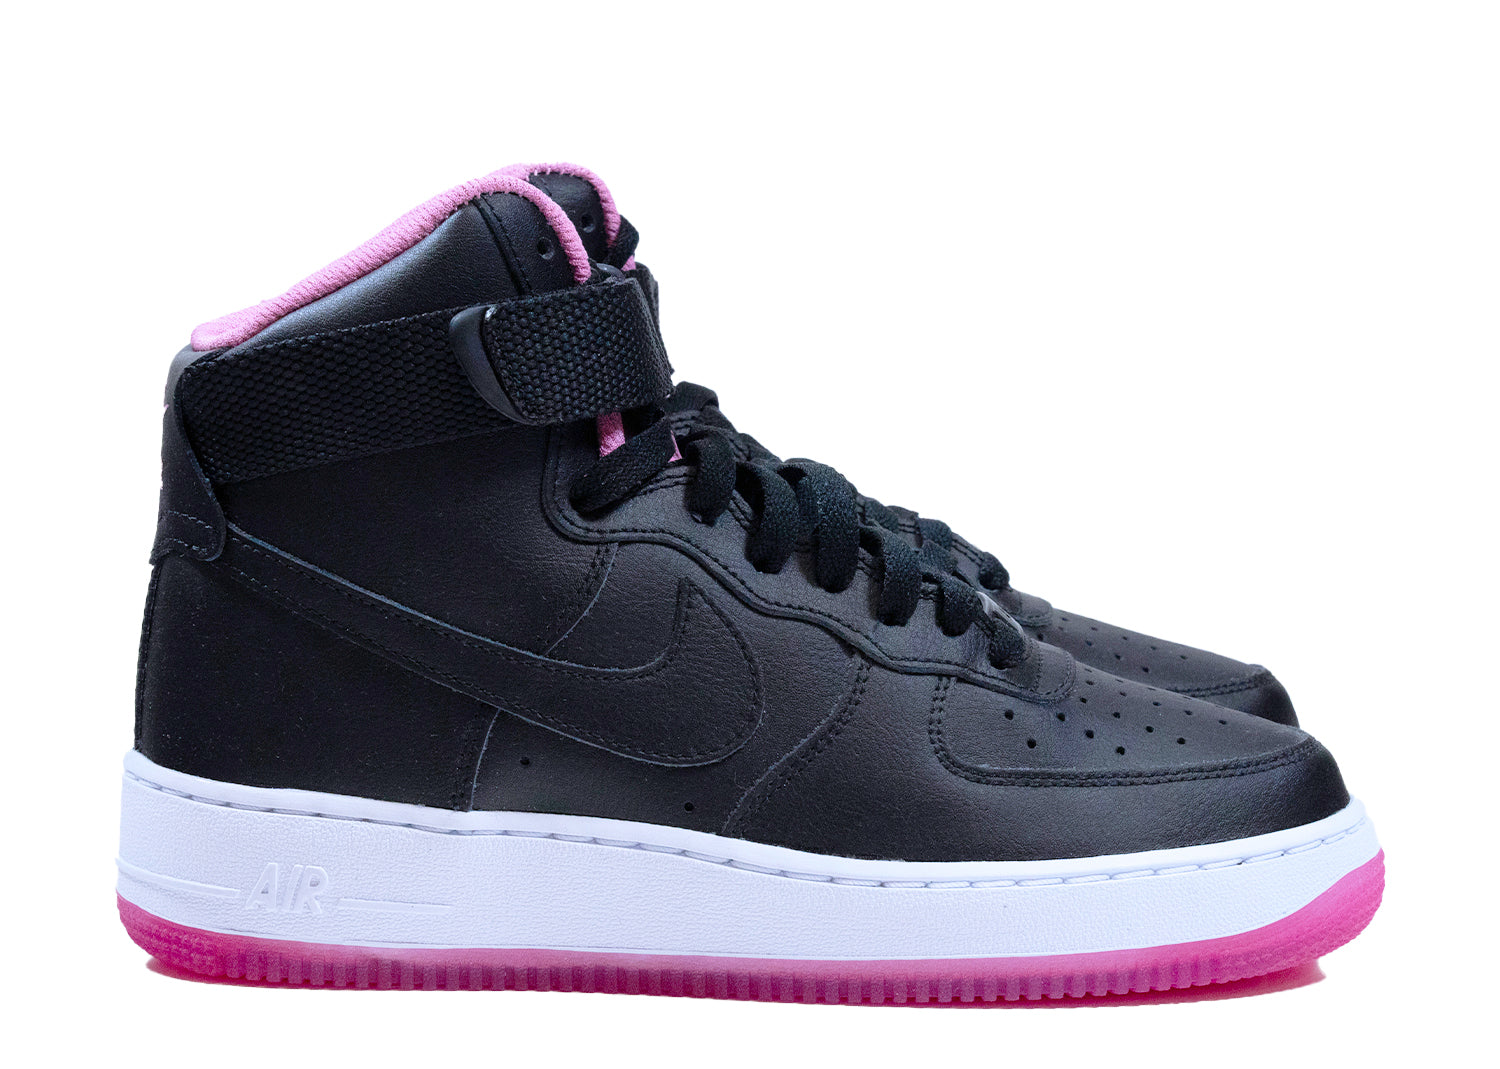 Second Chance - free Nike Air Force 1 High ID Black/pink - 38,5 | NEW